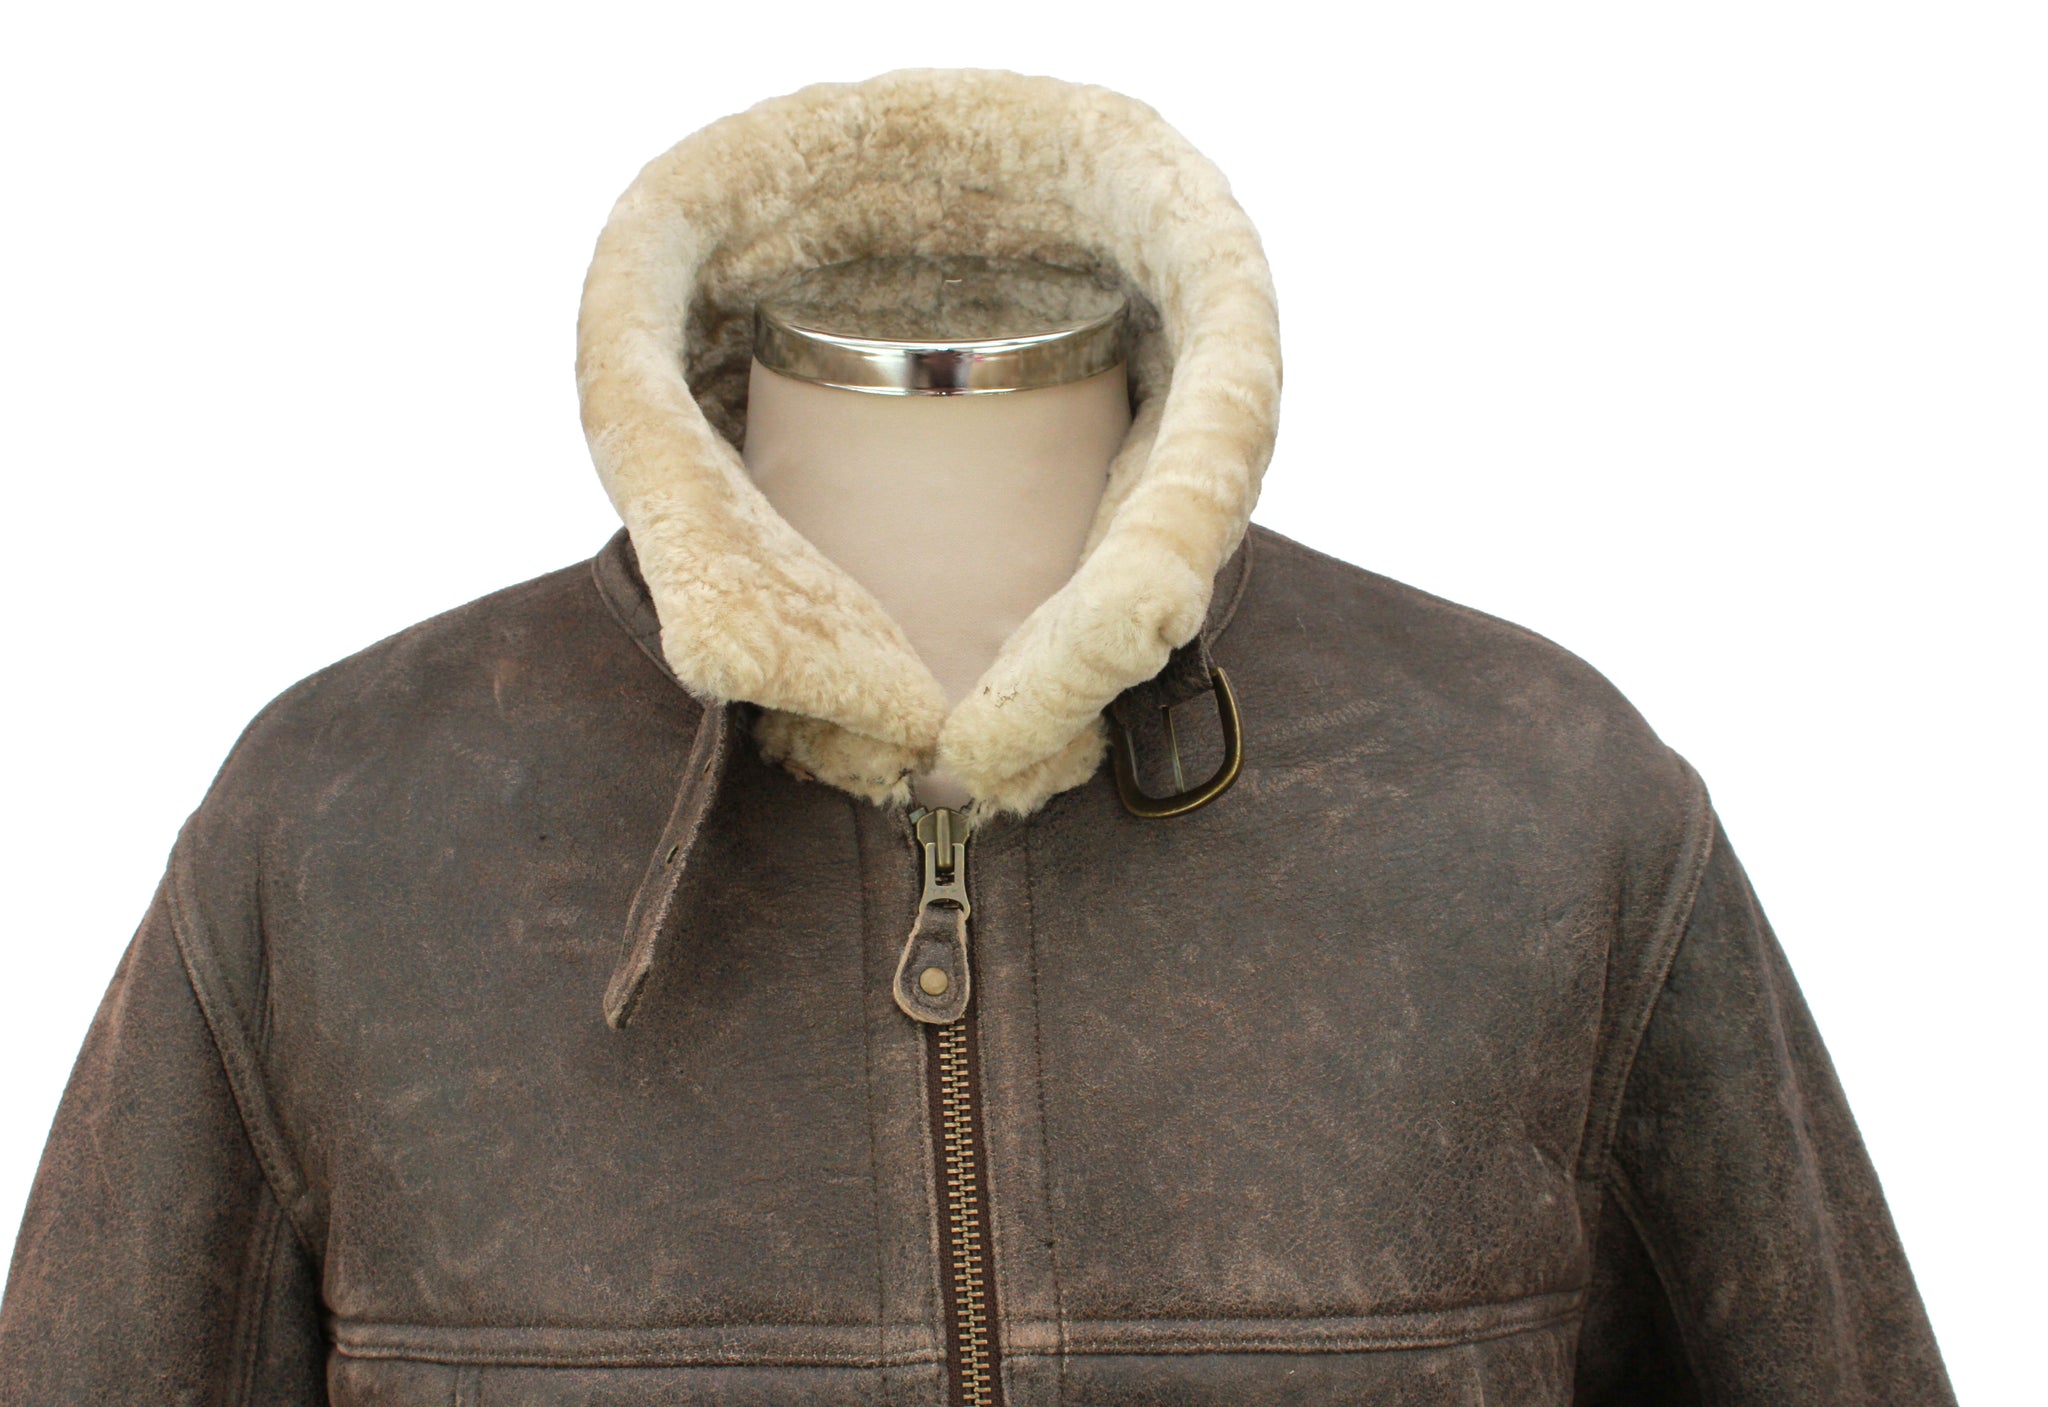 Men's Classic Centre Zip Sheepskin Jacket in Country Forest Distressed